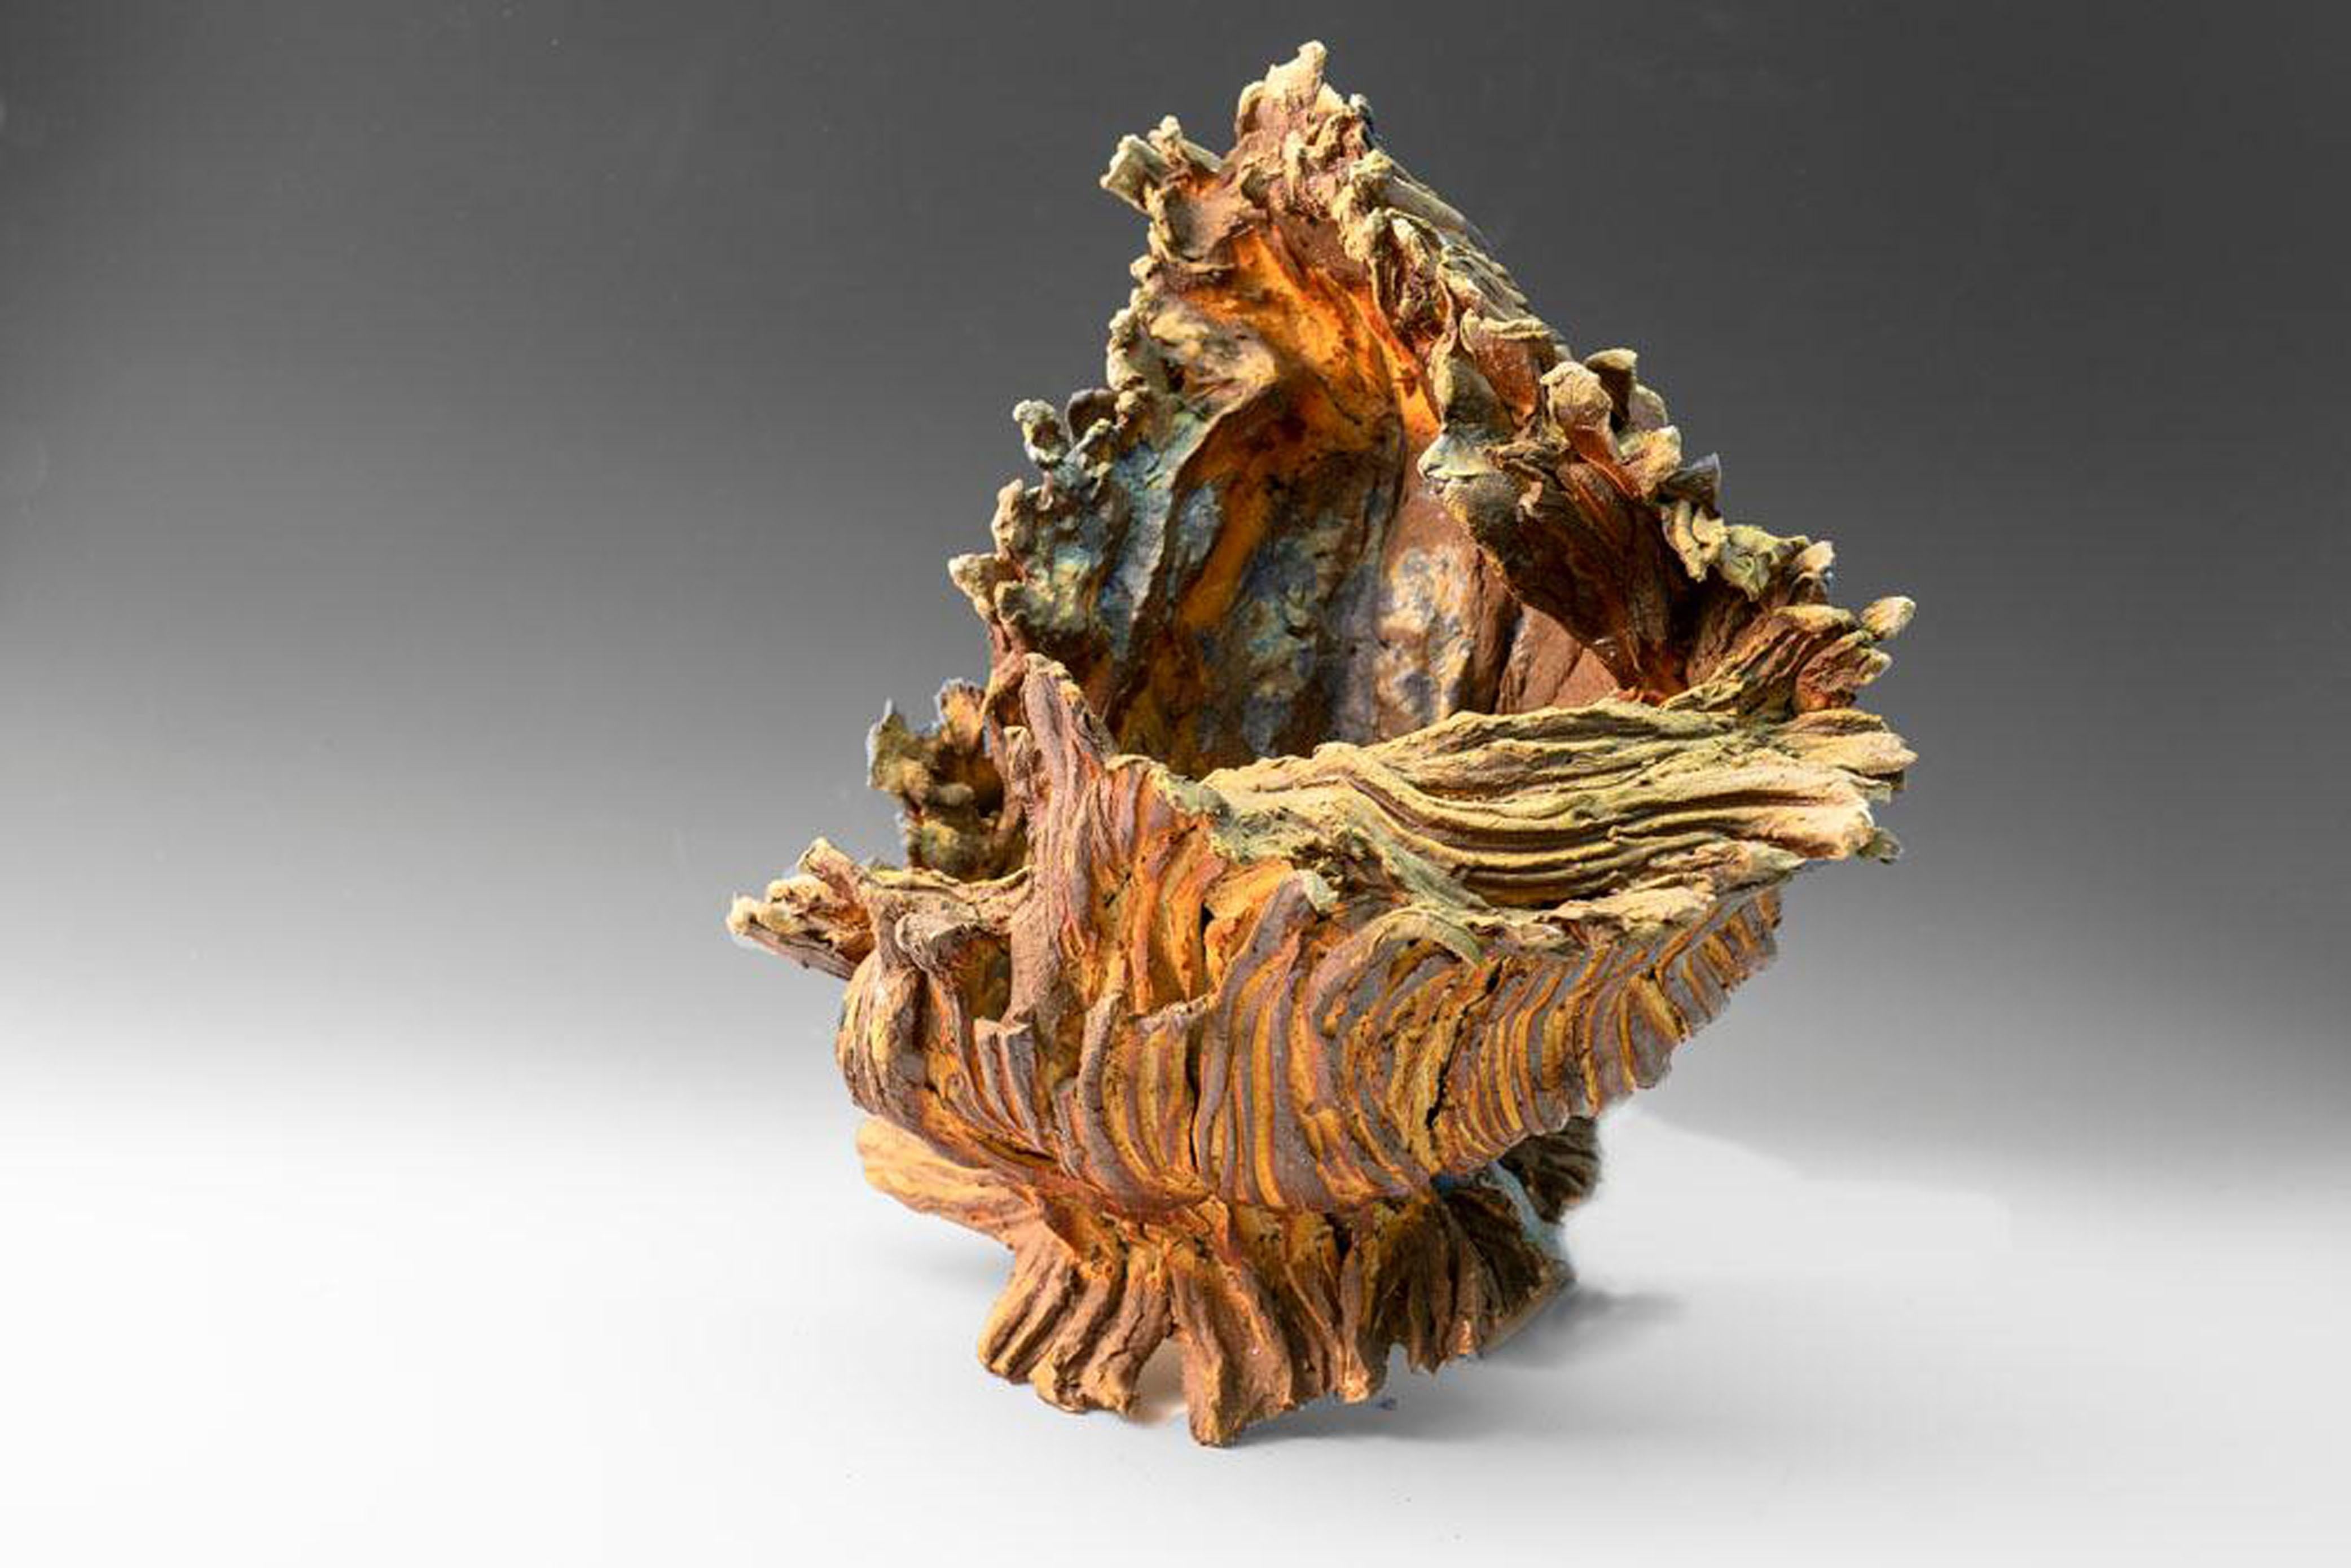 Allan Drossman Abstract Sculpture - "Sea Form 4", textured ceramic in golds and browns, embodies essential clay